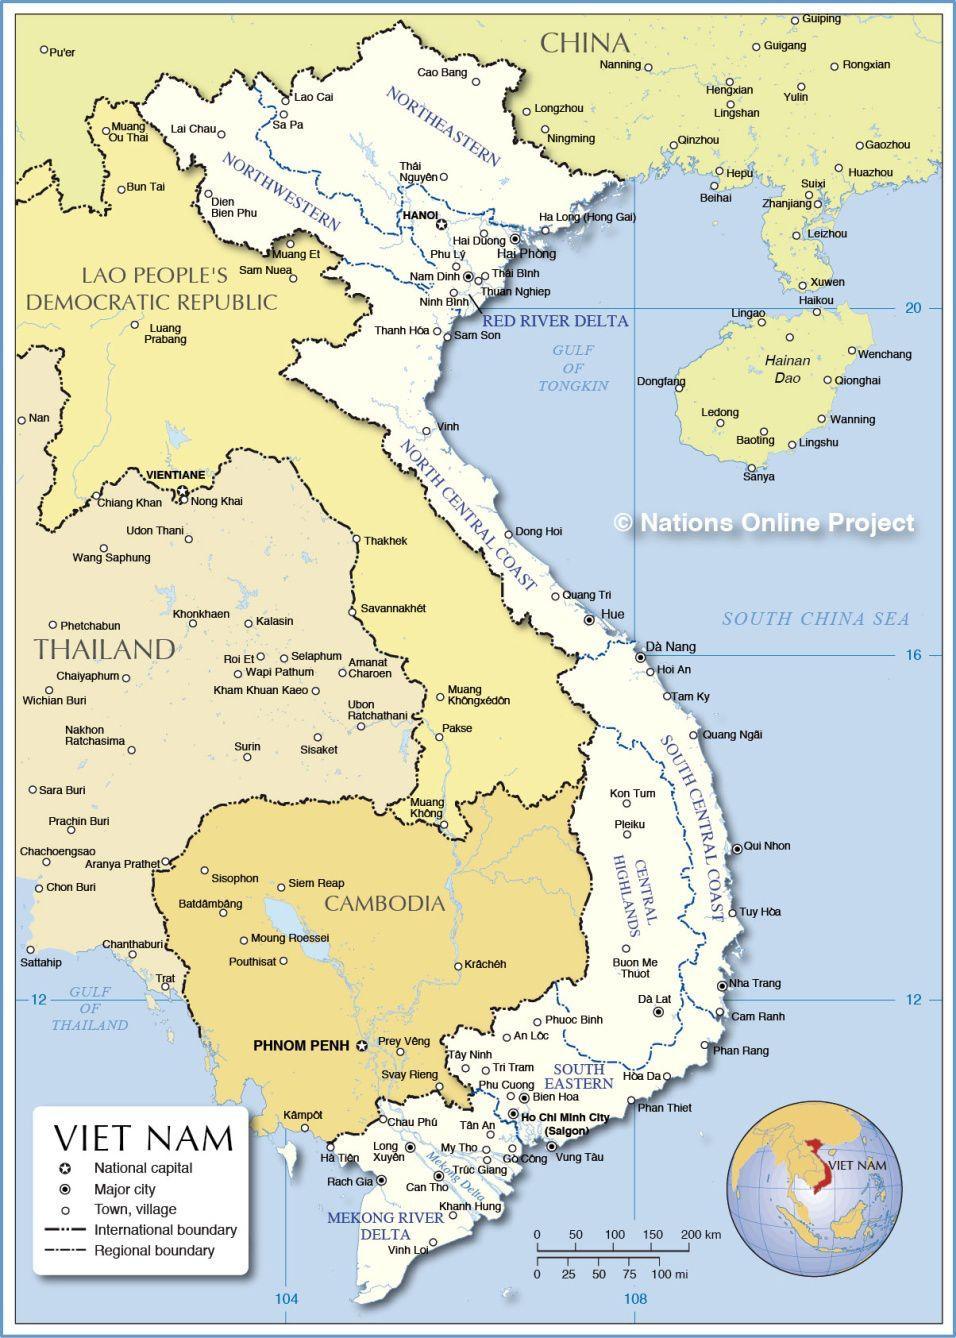 General information Located in the South East Asia region, having the typical tropical and tropical moonsoon climate; there are 7 regions with different climate aspects in Vietnam.